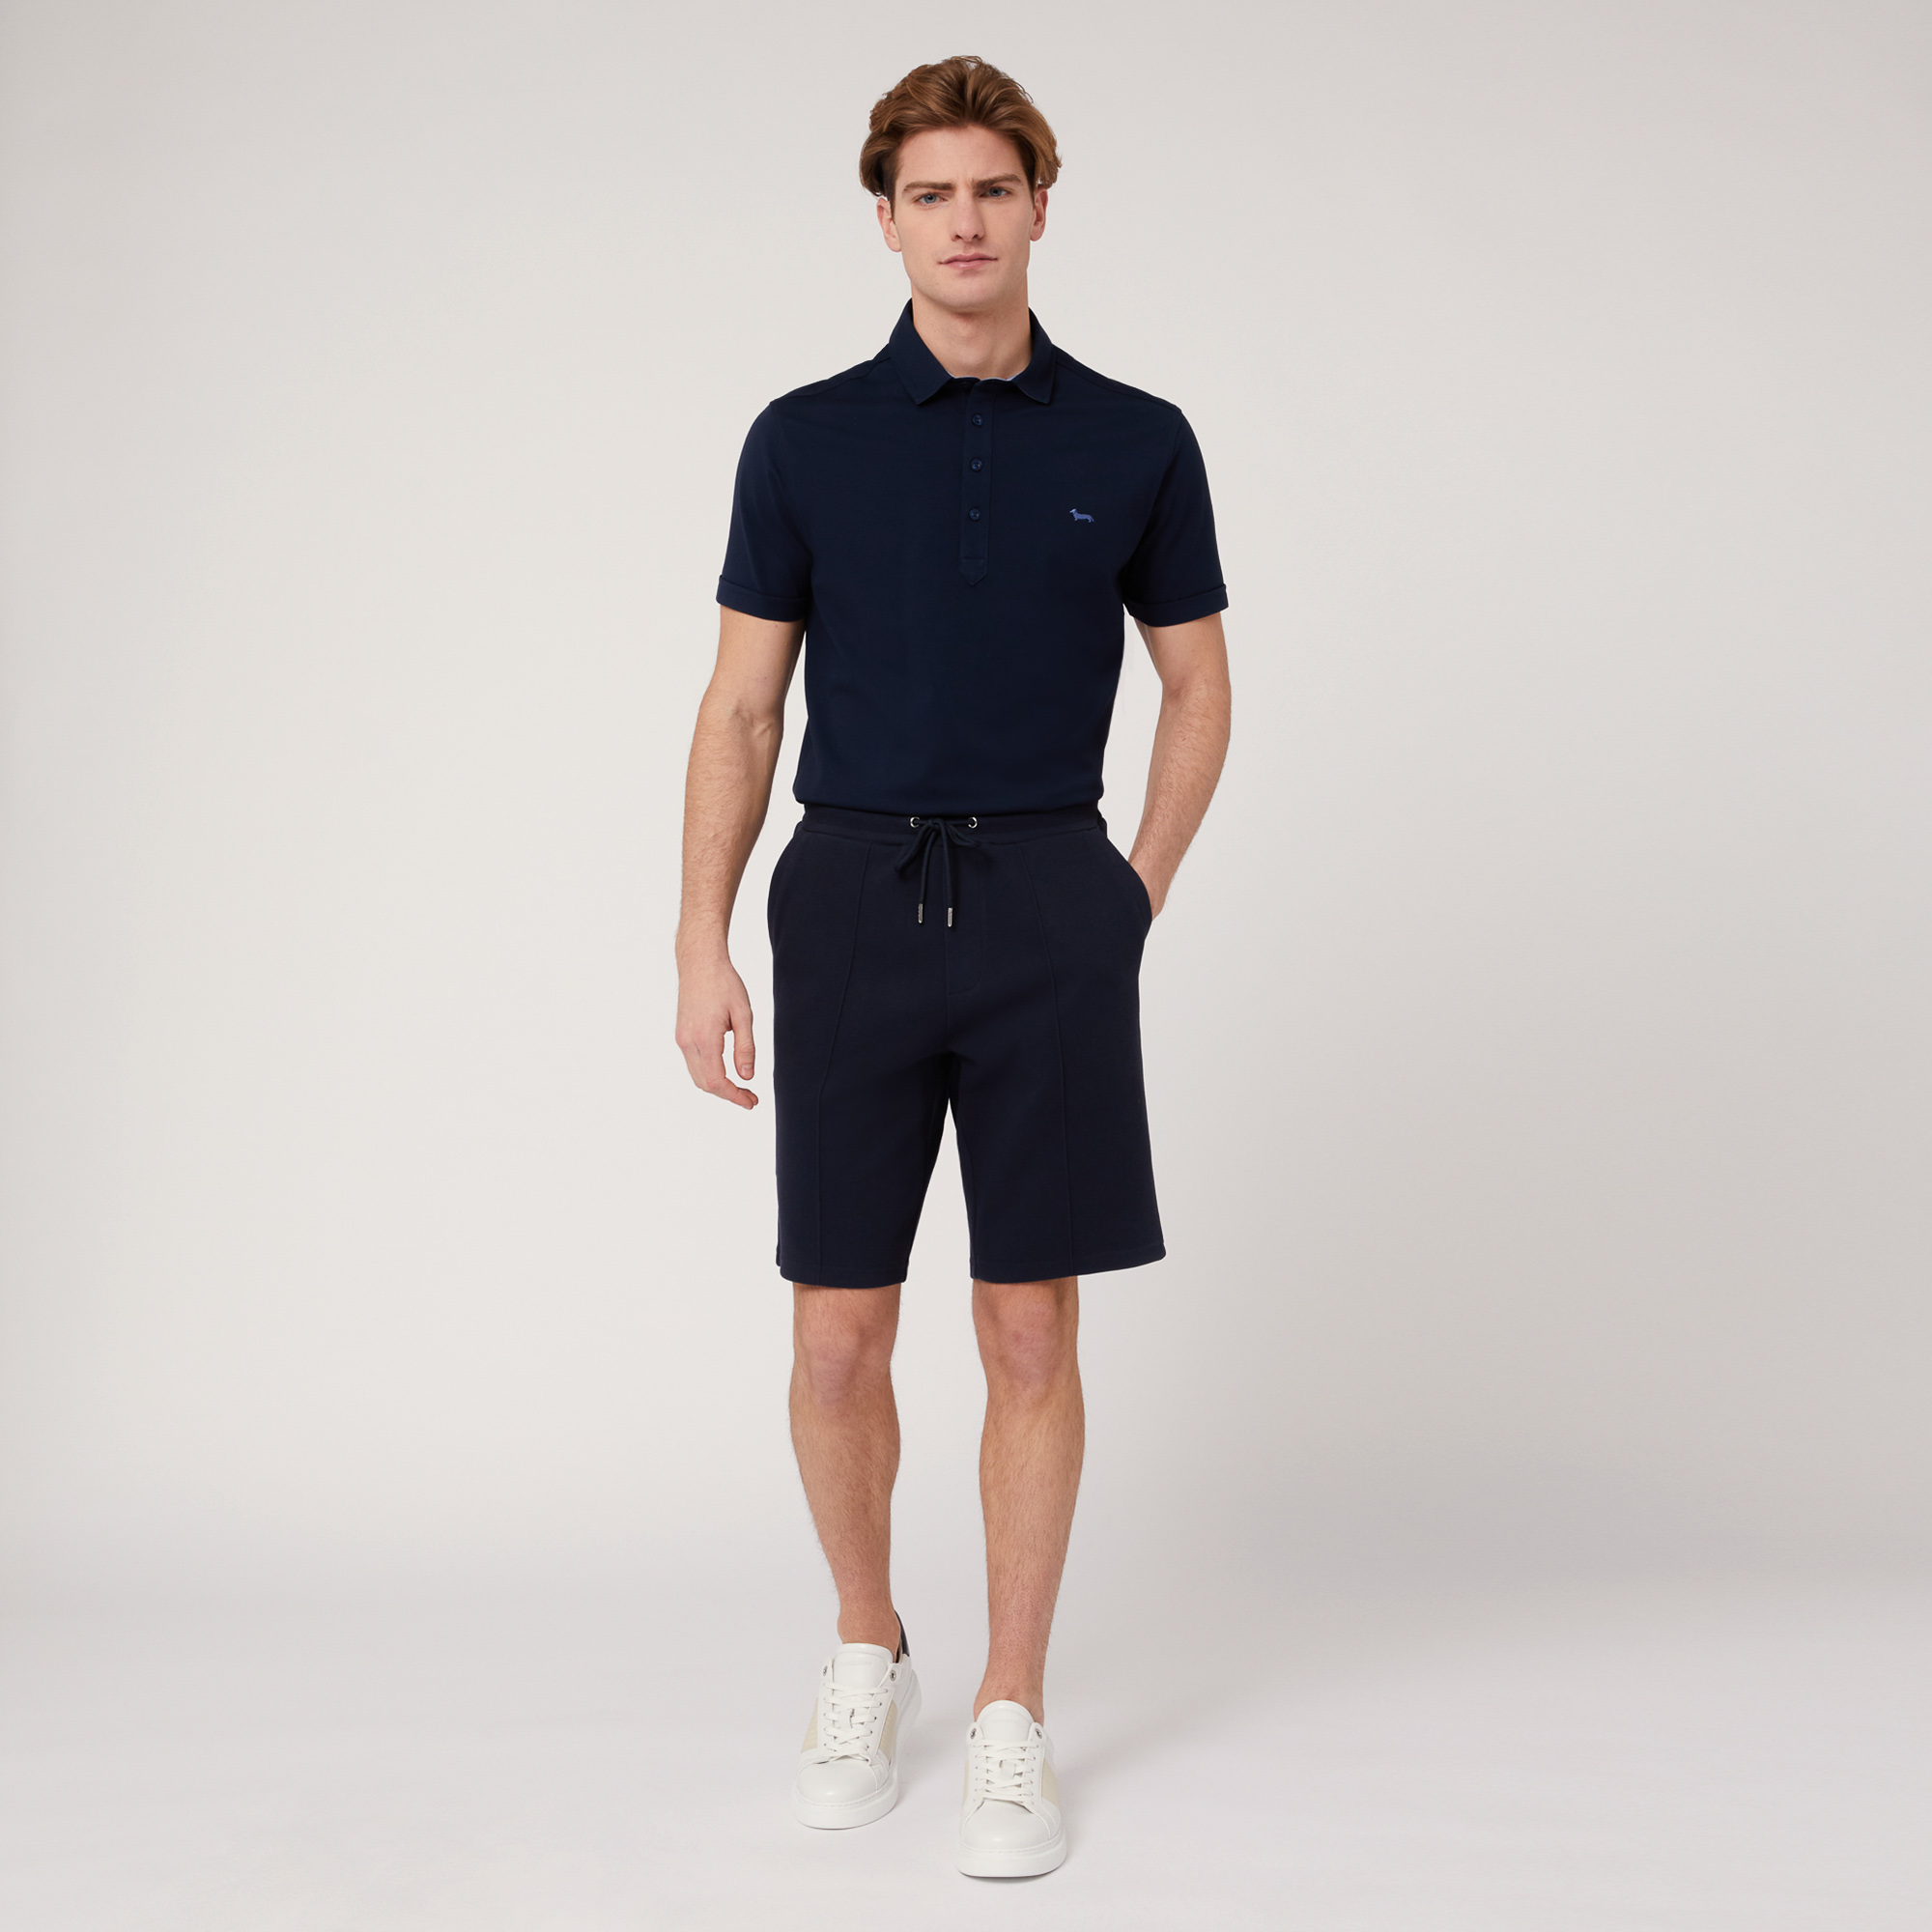 Shorts In Cotone Stretch Con Tasca Posteriore, Blu Navy, large image number 3